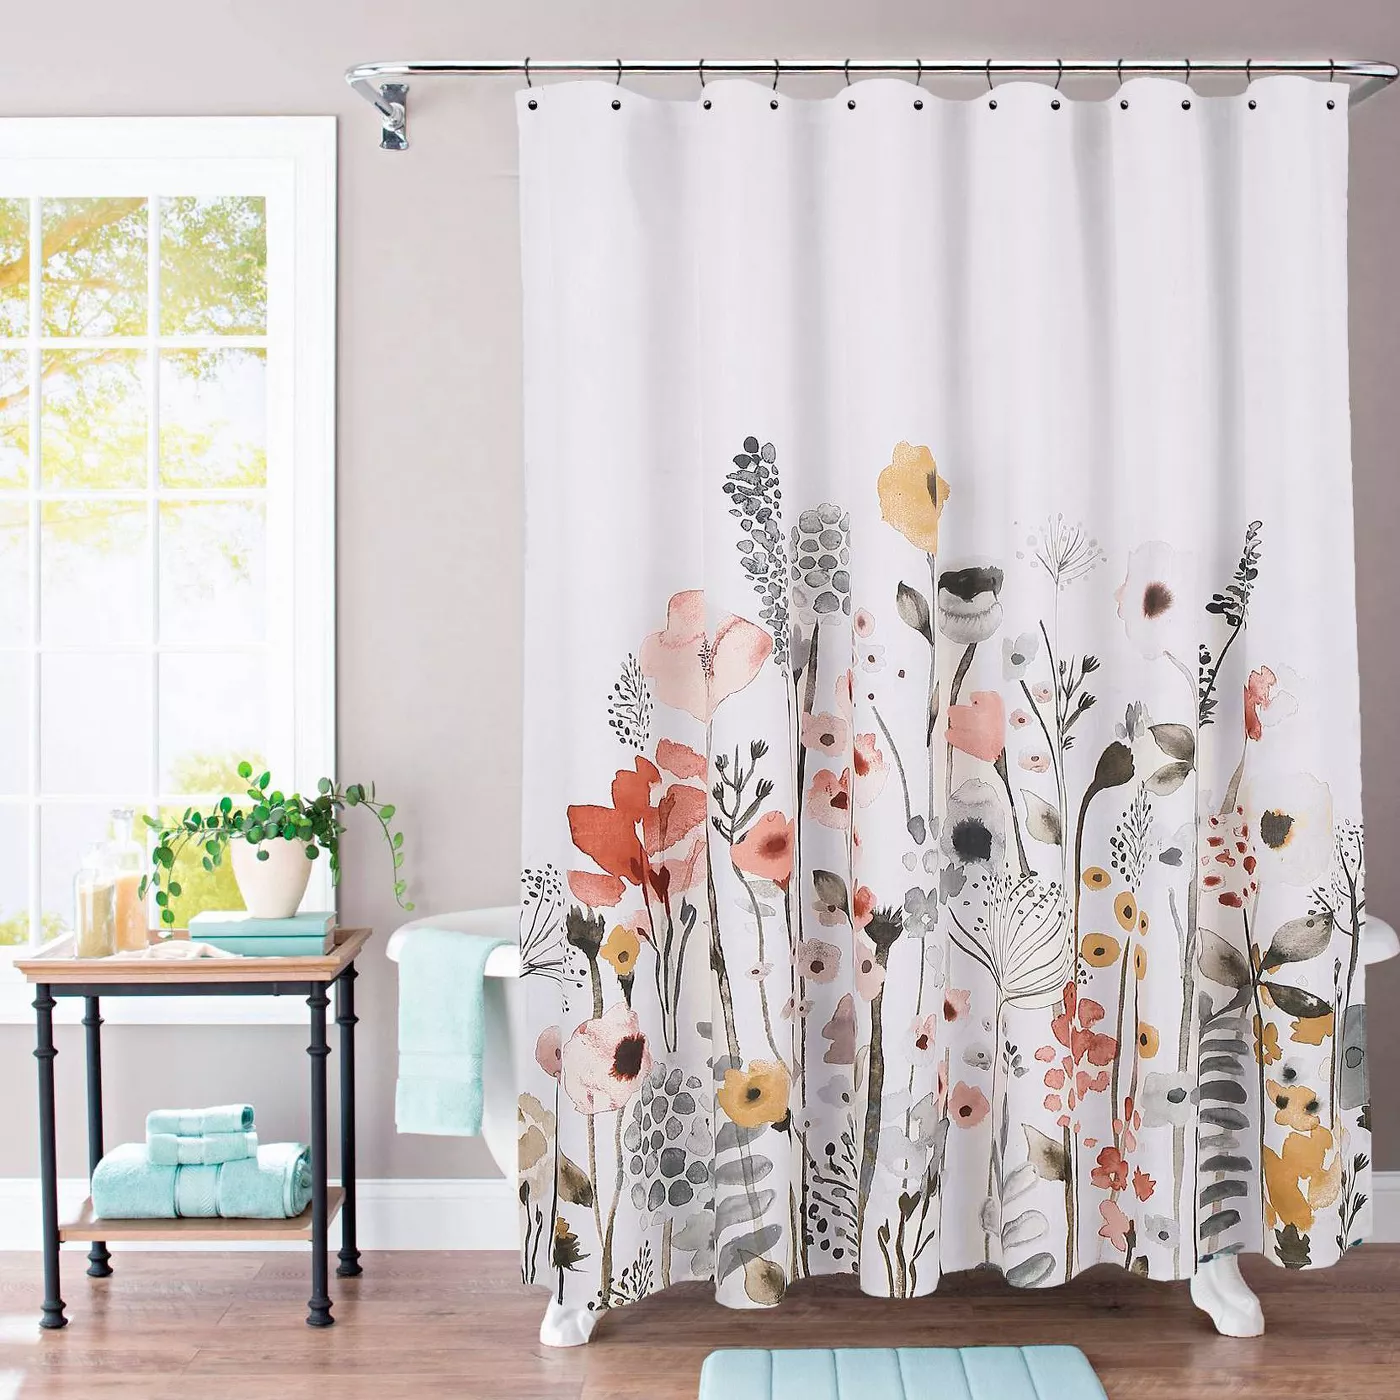 Floral Wave Shower Curtain White - Threshold™ - image 2 of 9